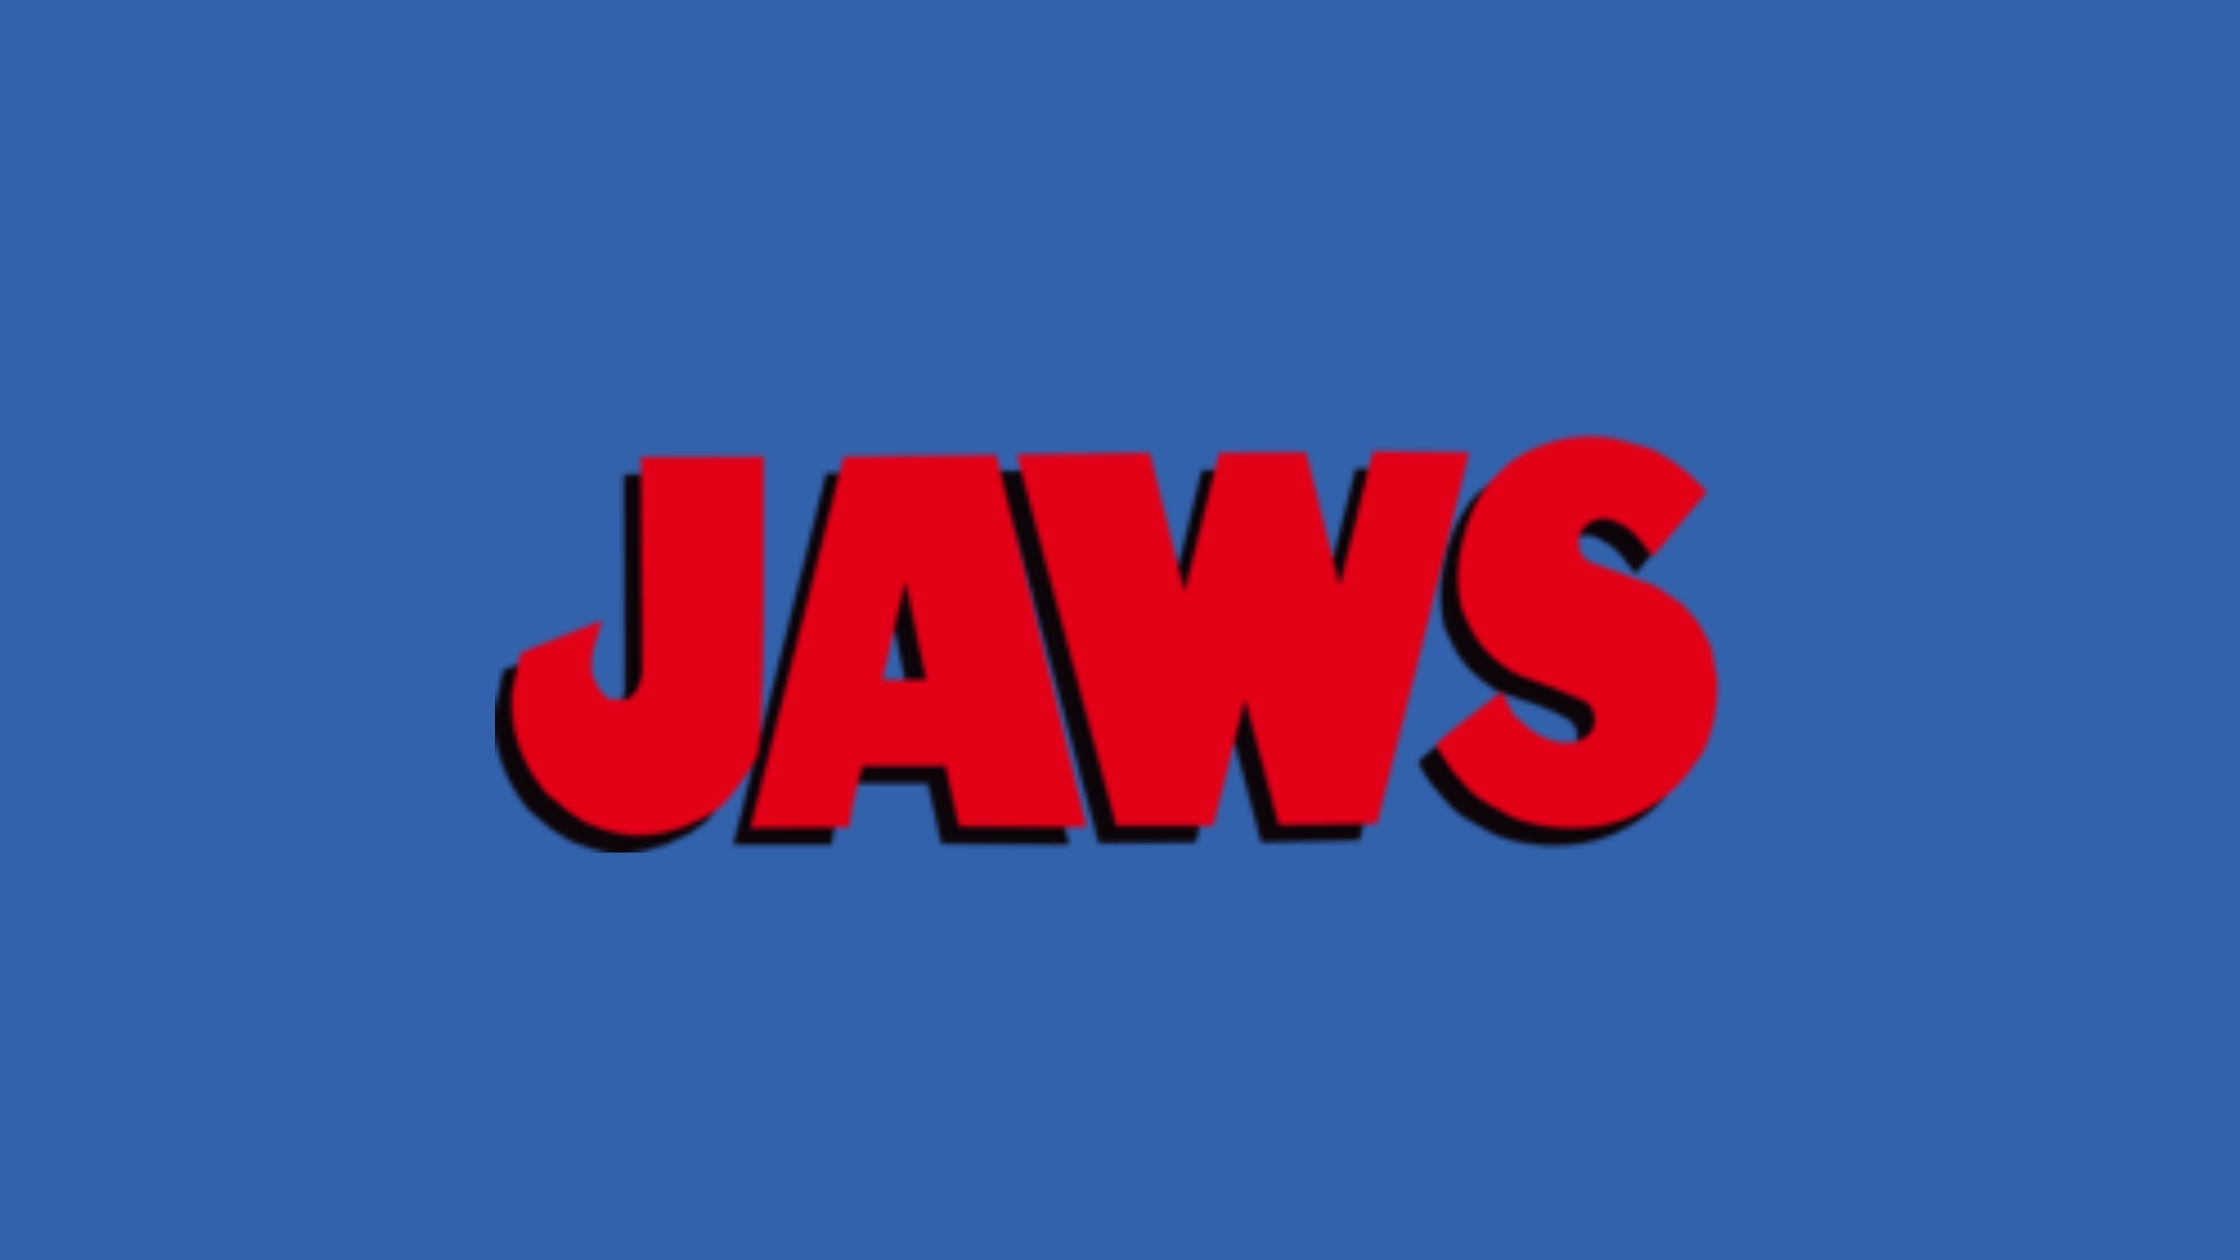 What Font Does Jaws Use